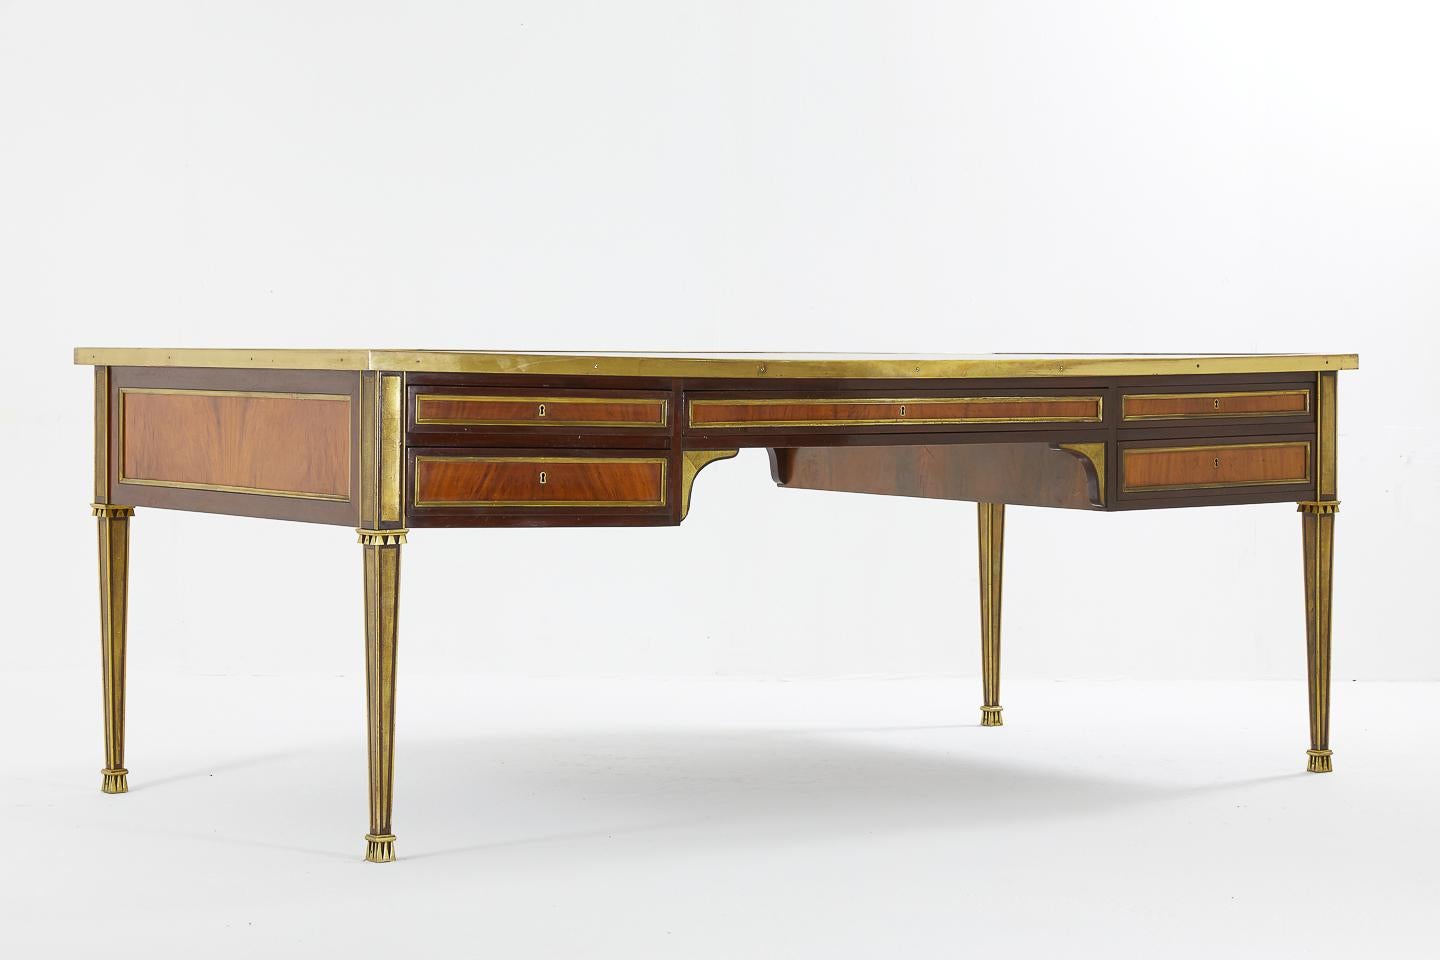 Impressive, large, 1960s French desk with excellent quality ormolu moulding and mounts. Very much in the style and quality of Baguès.
Difficult to find a desk of this quality and size.